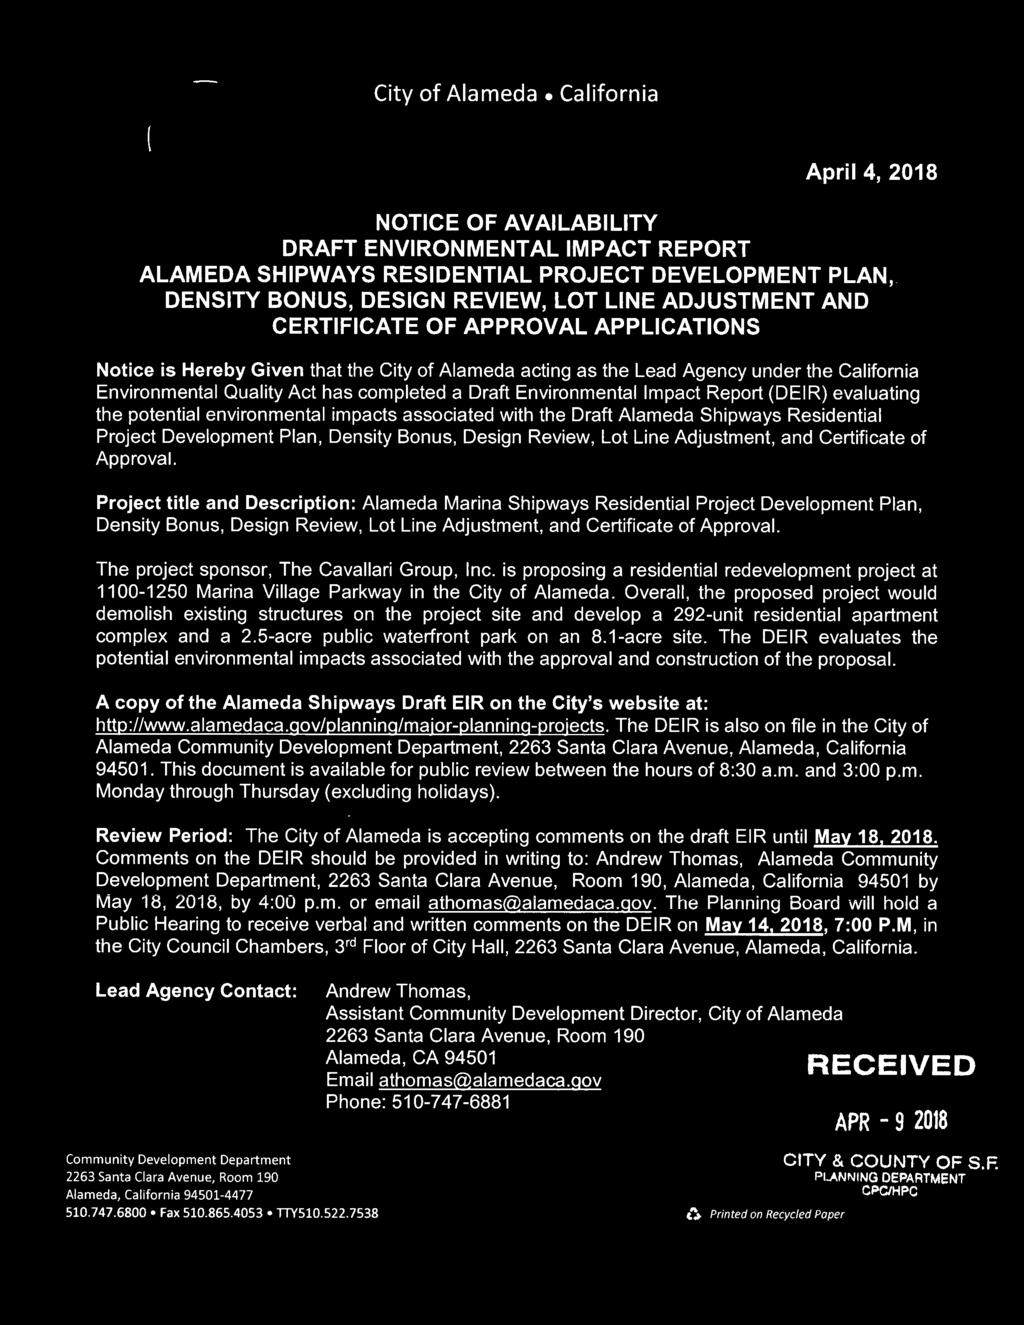 Quality Act has completed a Draft Environmental Impact Report (DEIR) evaluating the potential environmental impacts associated with the Draft Alameda Shipways Residential Project Development Plan,